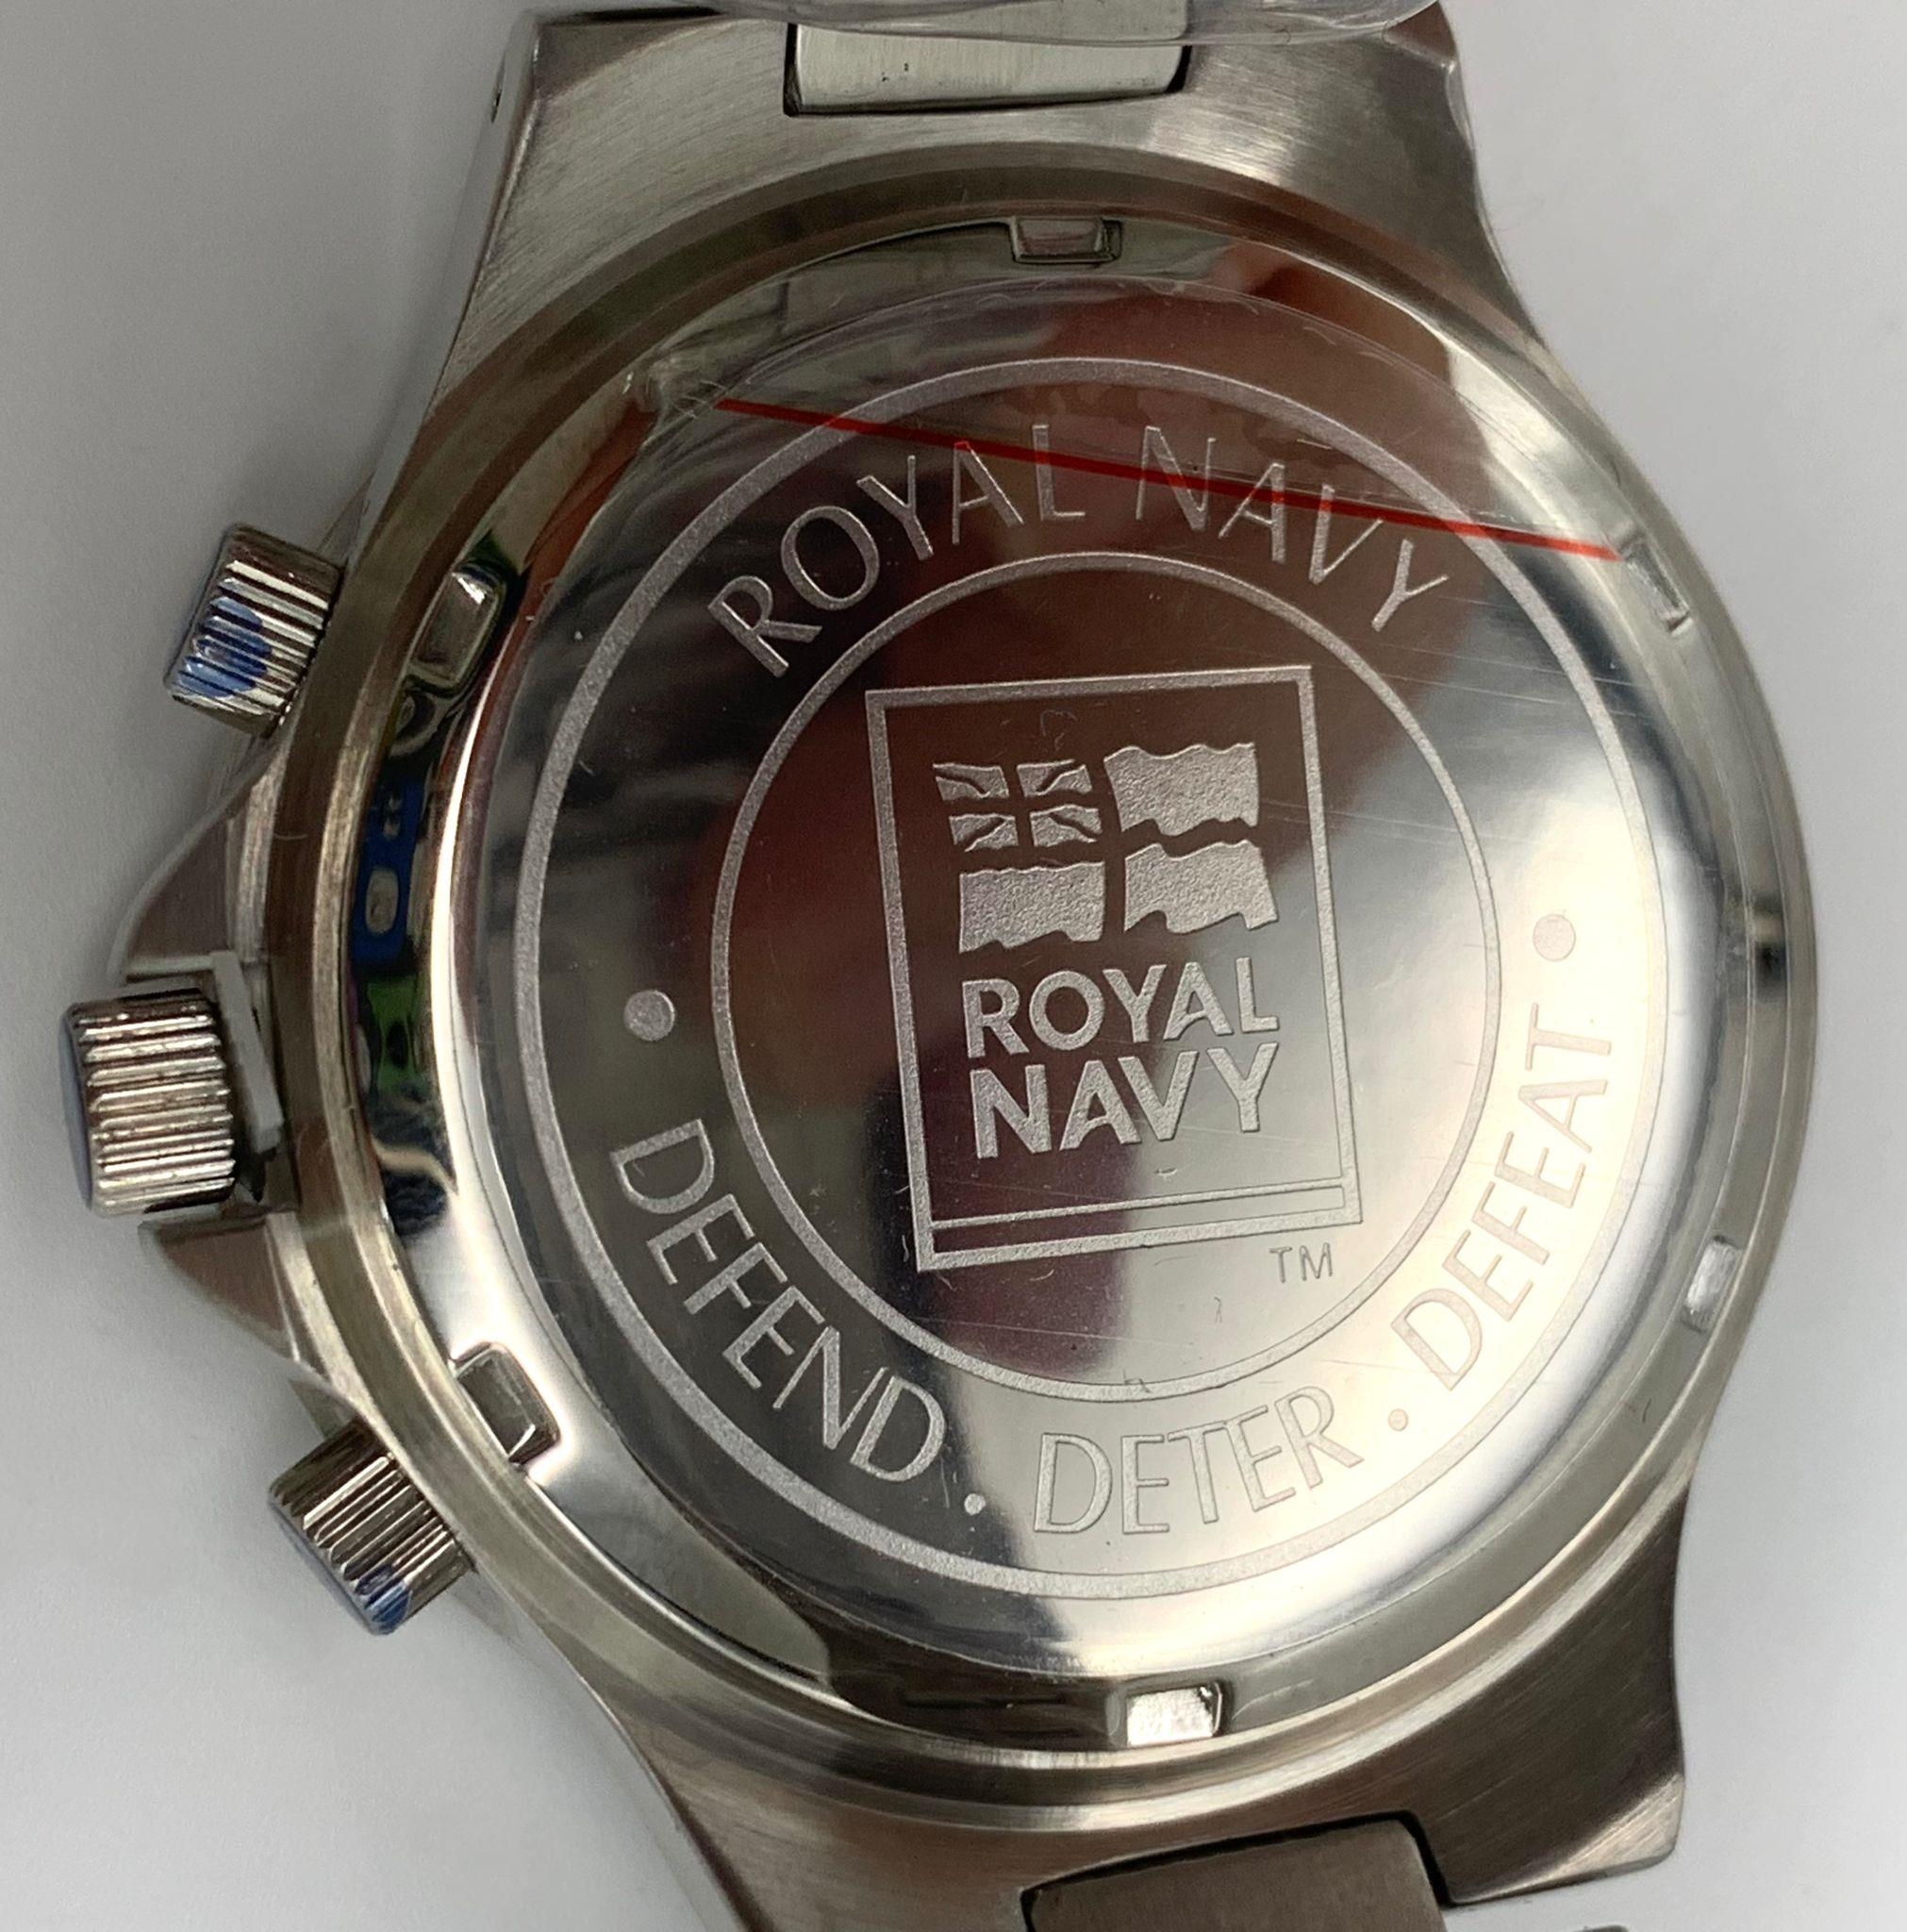 Unworn Limited Edition ‘Sovereign on the Seas’ Royal Navy Chronograph Watch, still in Original Box - Image 8 of 12